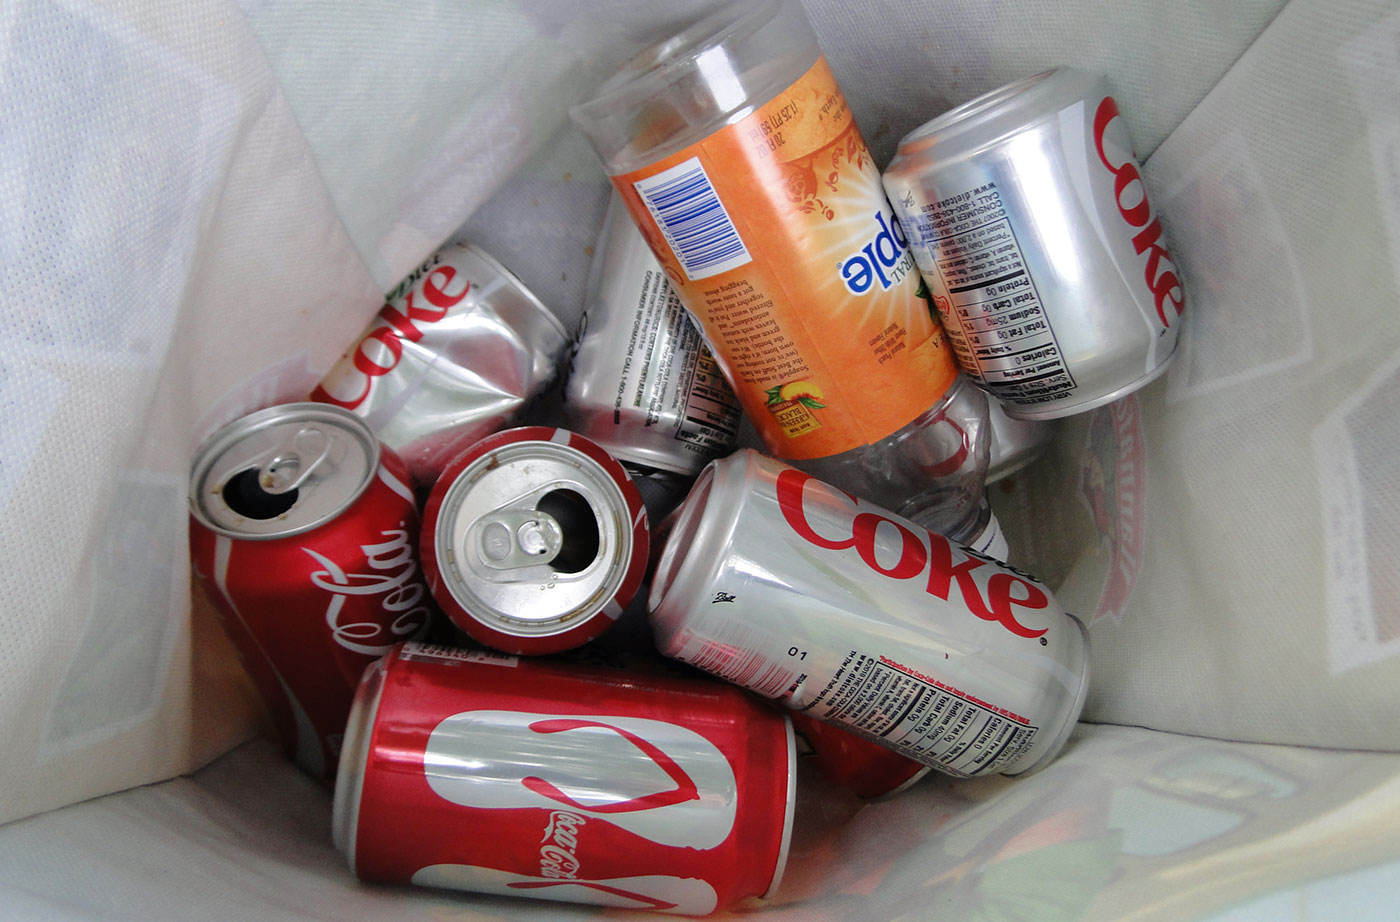 returnable cans in bag